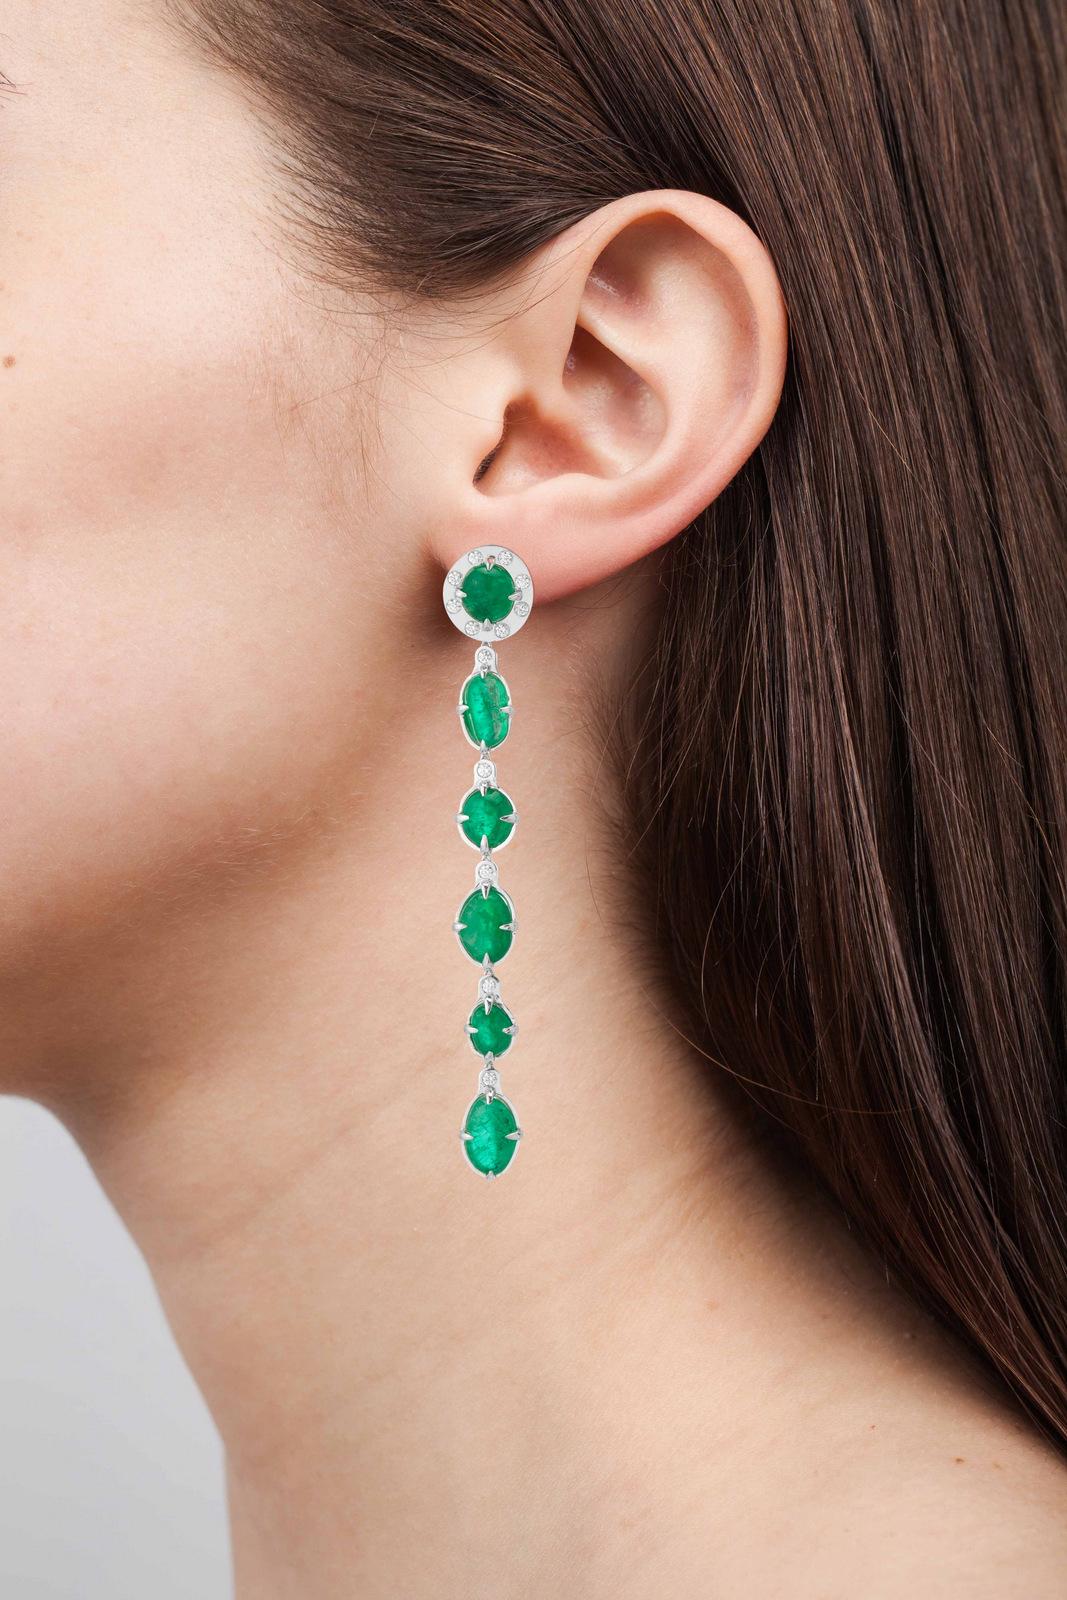 18 Karat classic drop earrings with halo diamonds weighing 0.94 carats and tumbled Muzo Colombian emeralds weighing 35.68 carats.

Muzo Emerald Colombia Heritage Muisca Earrings set with 35.68 carats Emerald.

Named in honor of the ancient